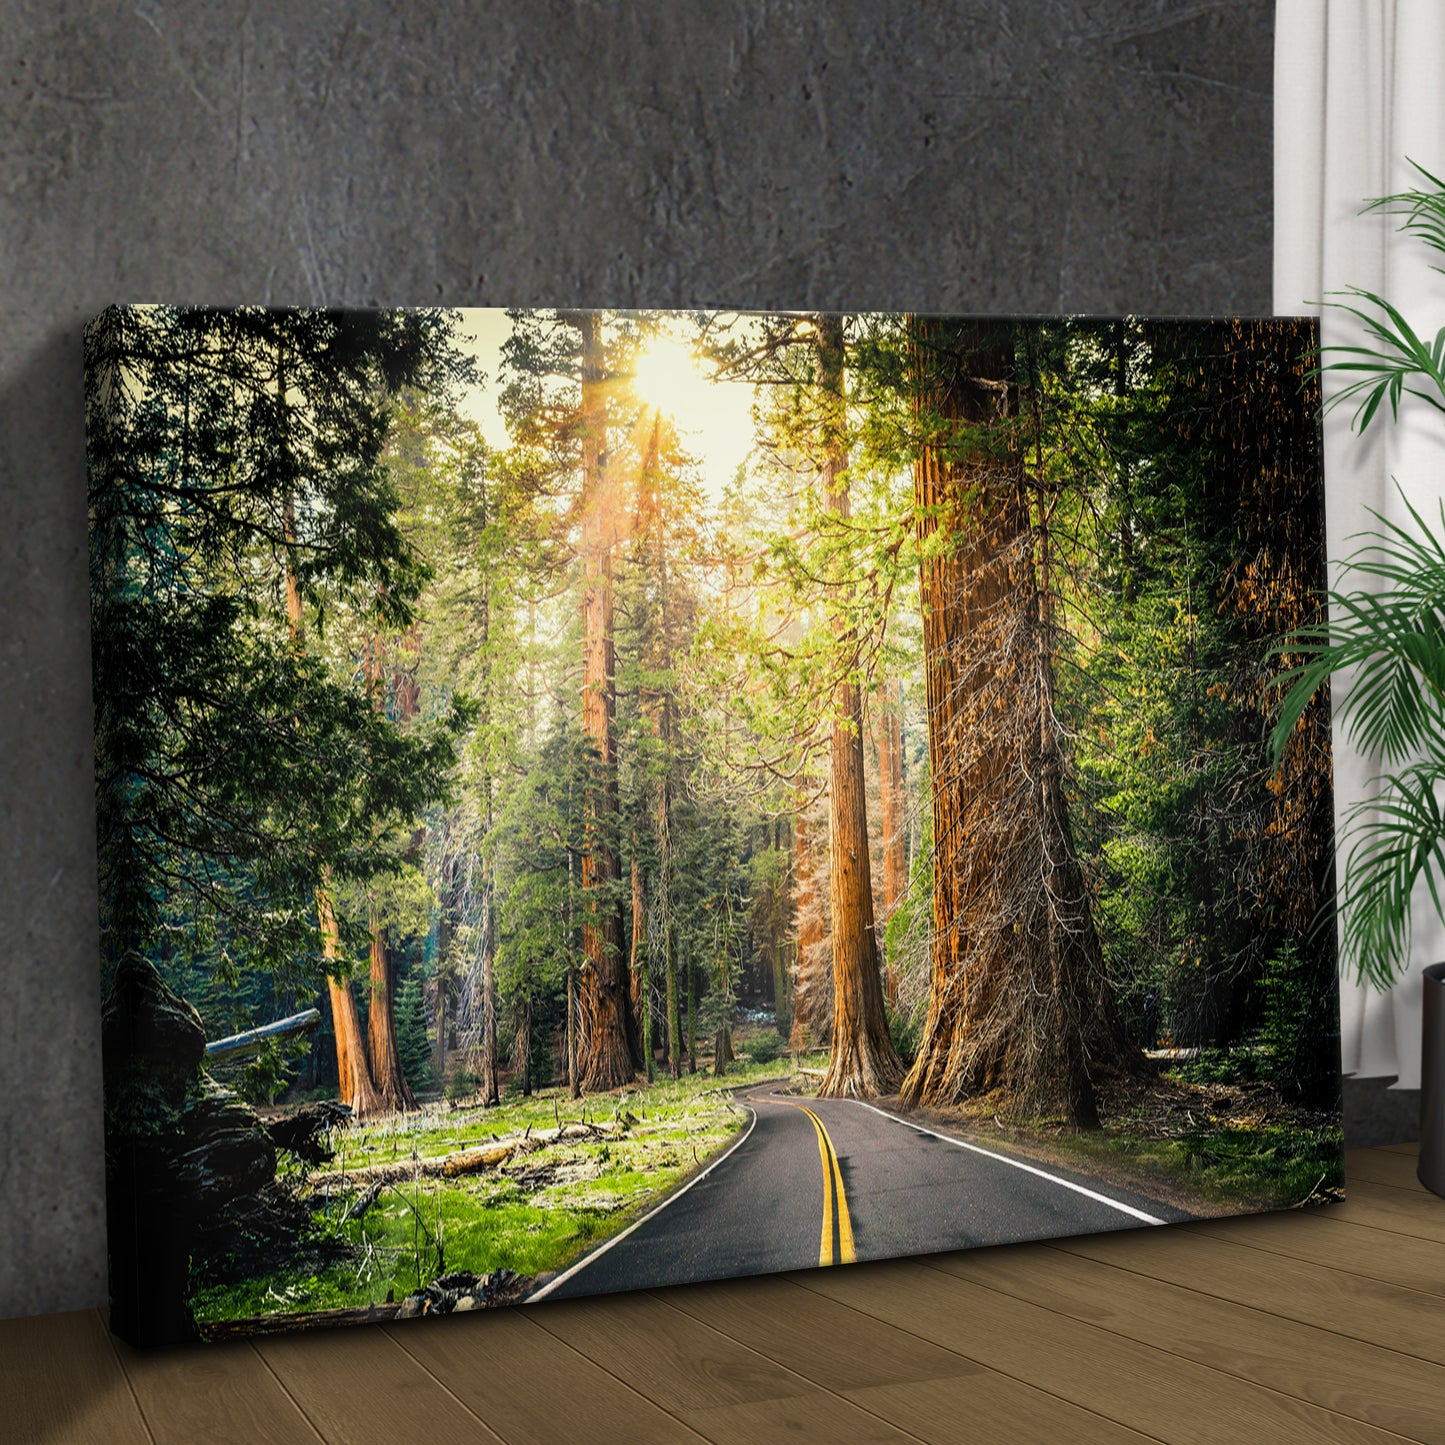 Sequoia Tree Lane Canvas Wall Art Style 2 - Image by Tailored Canvases